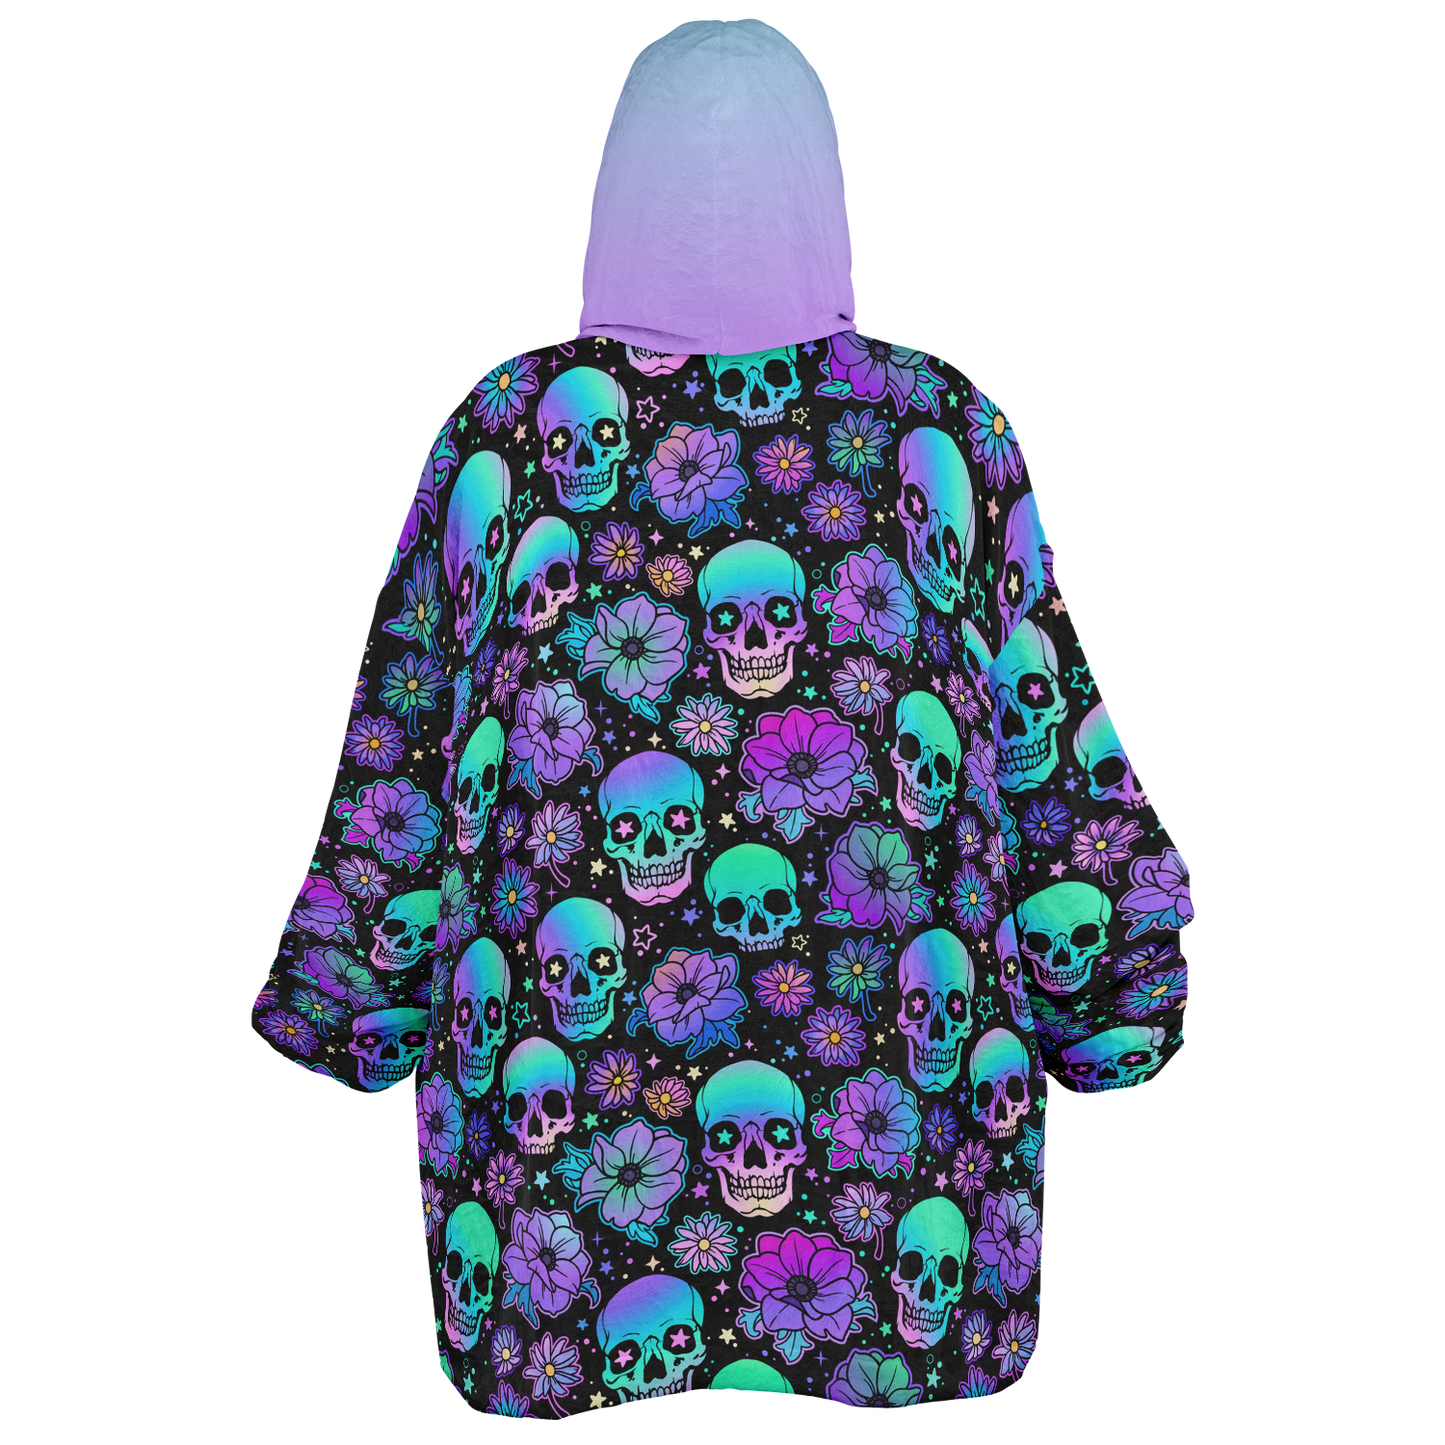 Rave Vibes Super Hoodie - Available for a Strictly Limited Time - Buy 2 & Get FREE Shipping